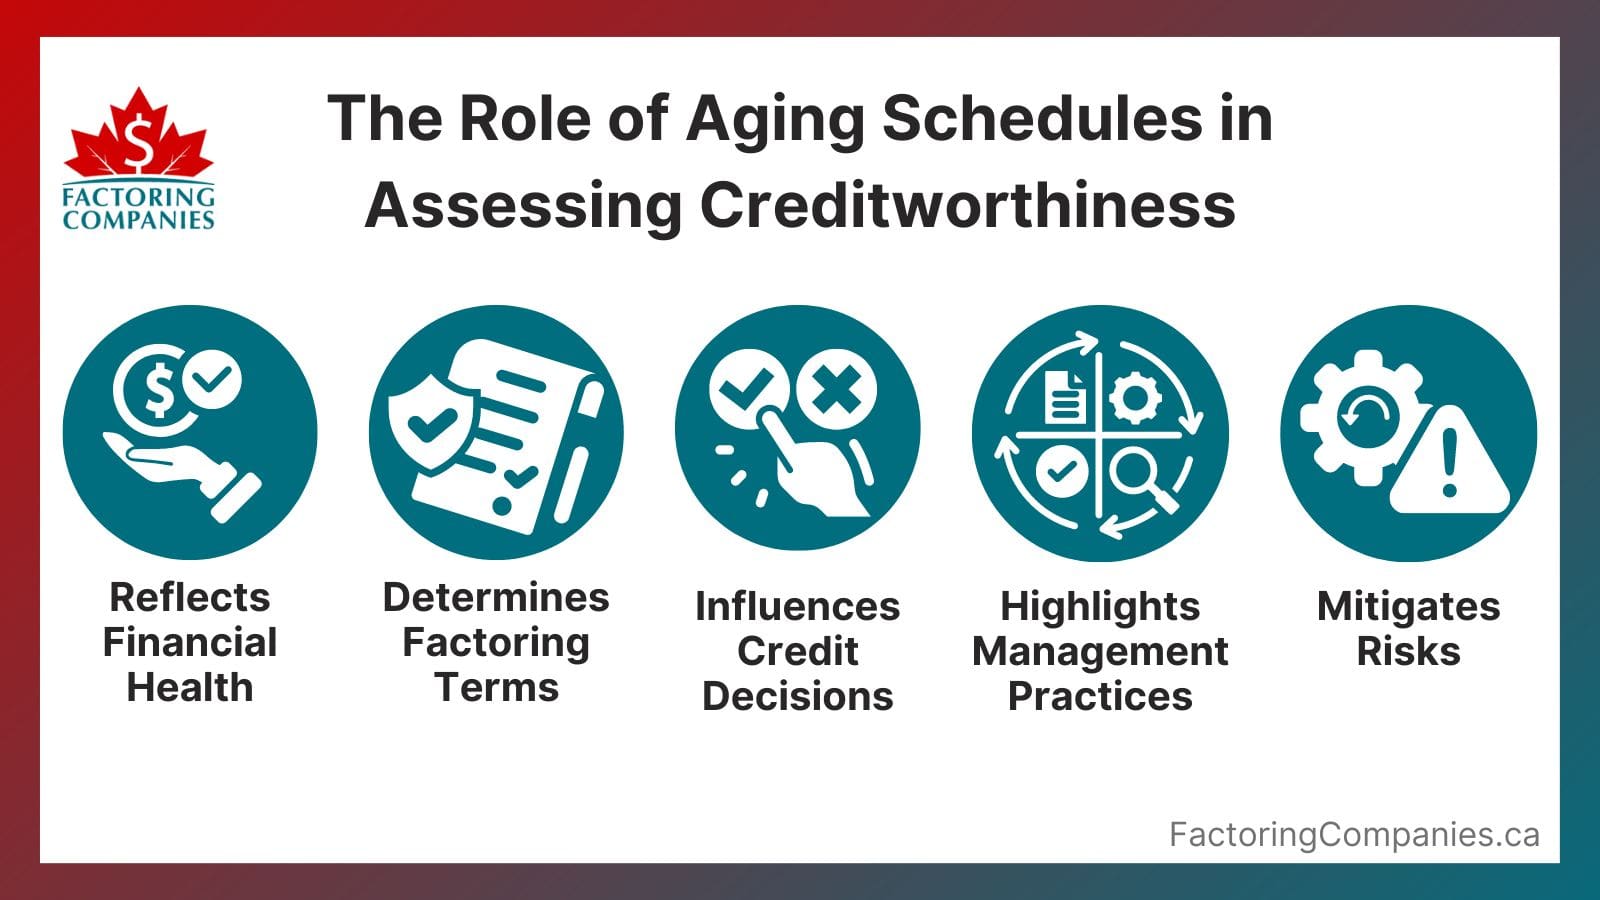 The Role of Aging Schedules in Assessing Creditworthiness